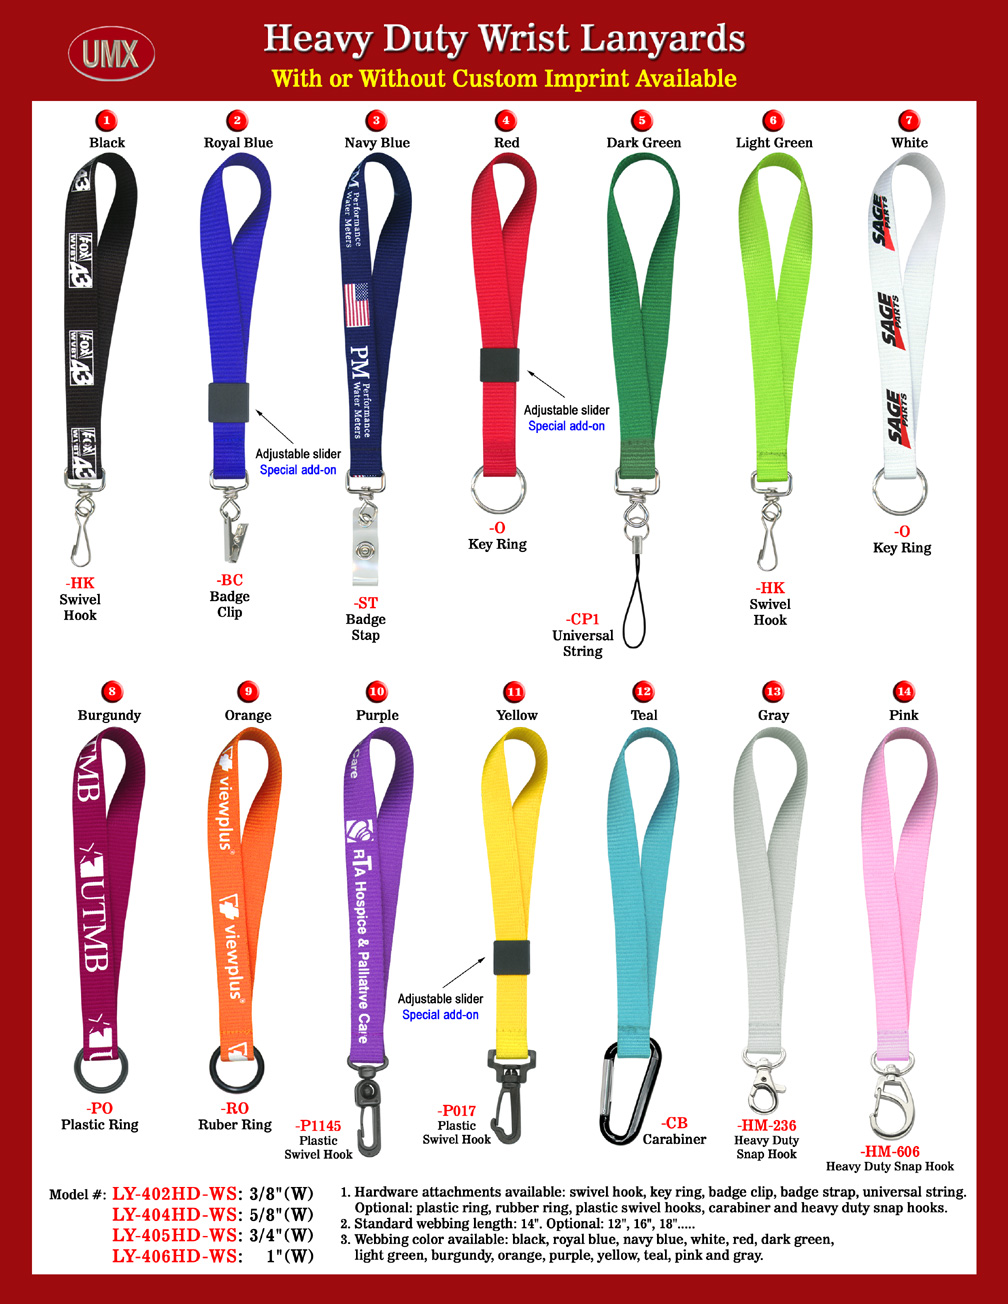 The 3/8", 5/8", 3/4" and 1" heavy duty plain color wrist lanyards come with 14-colors available.